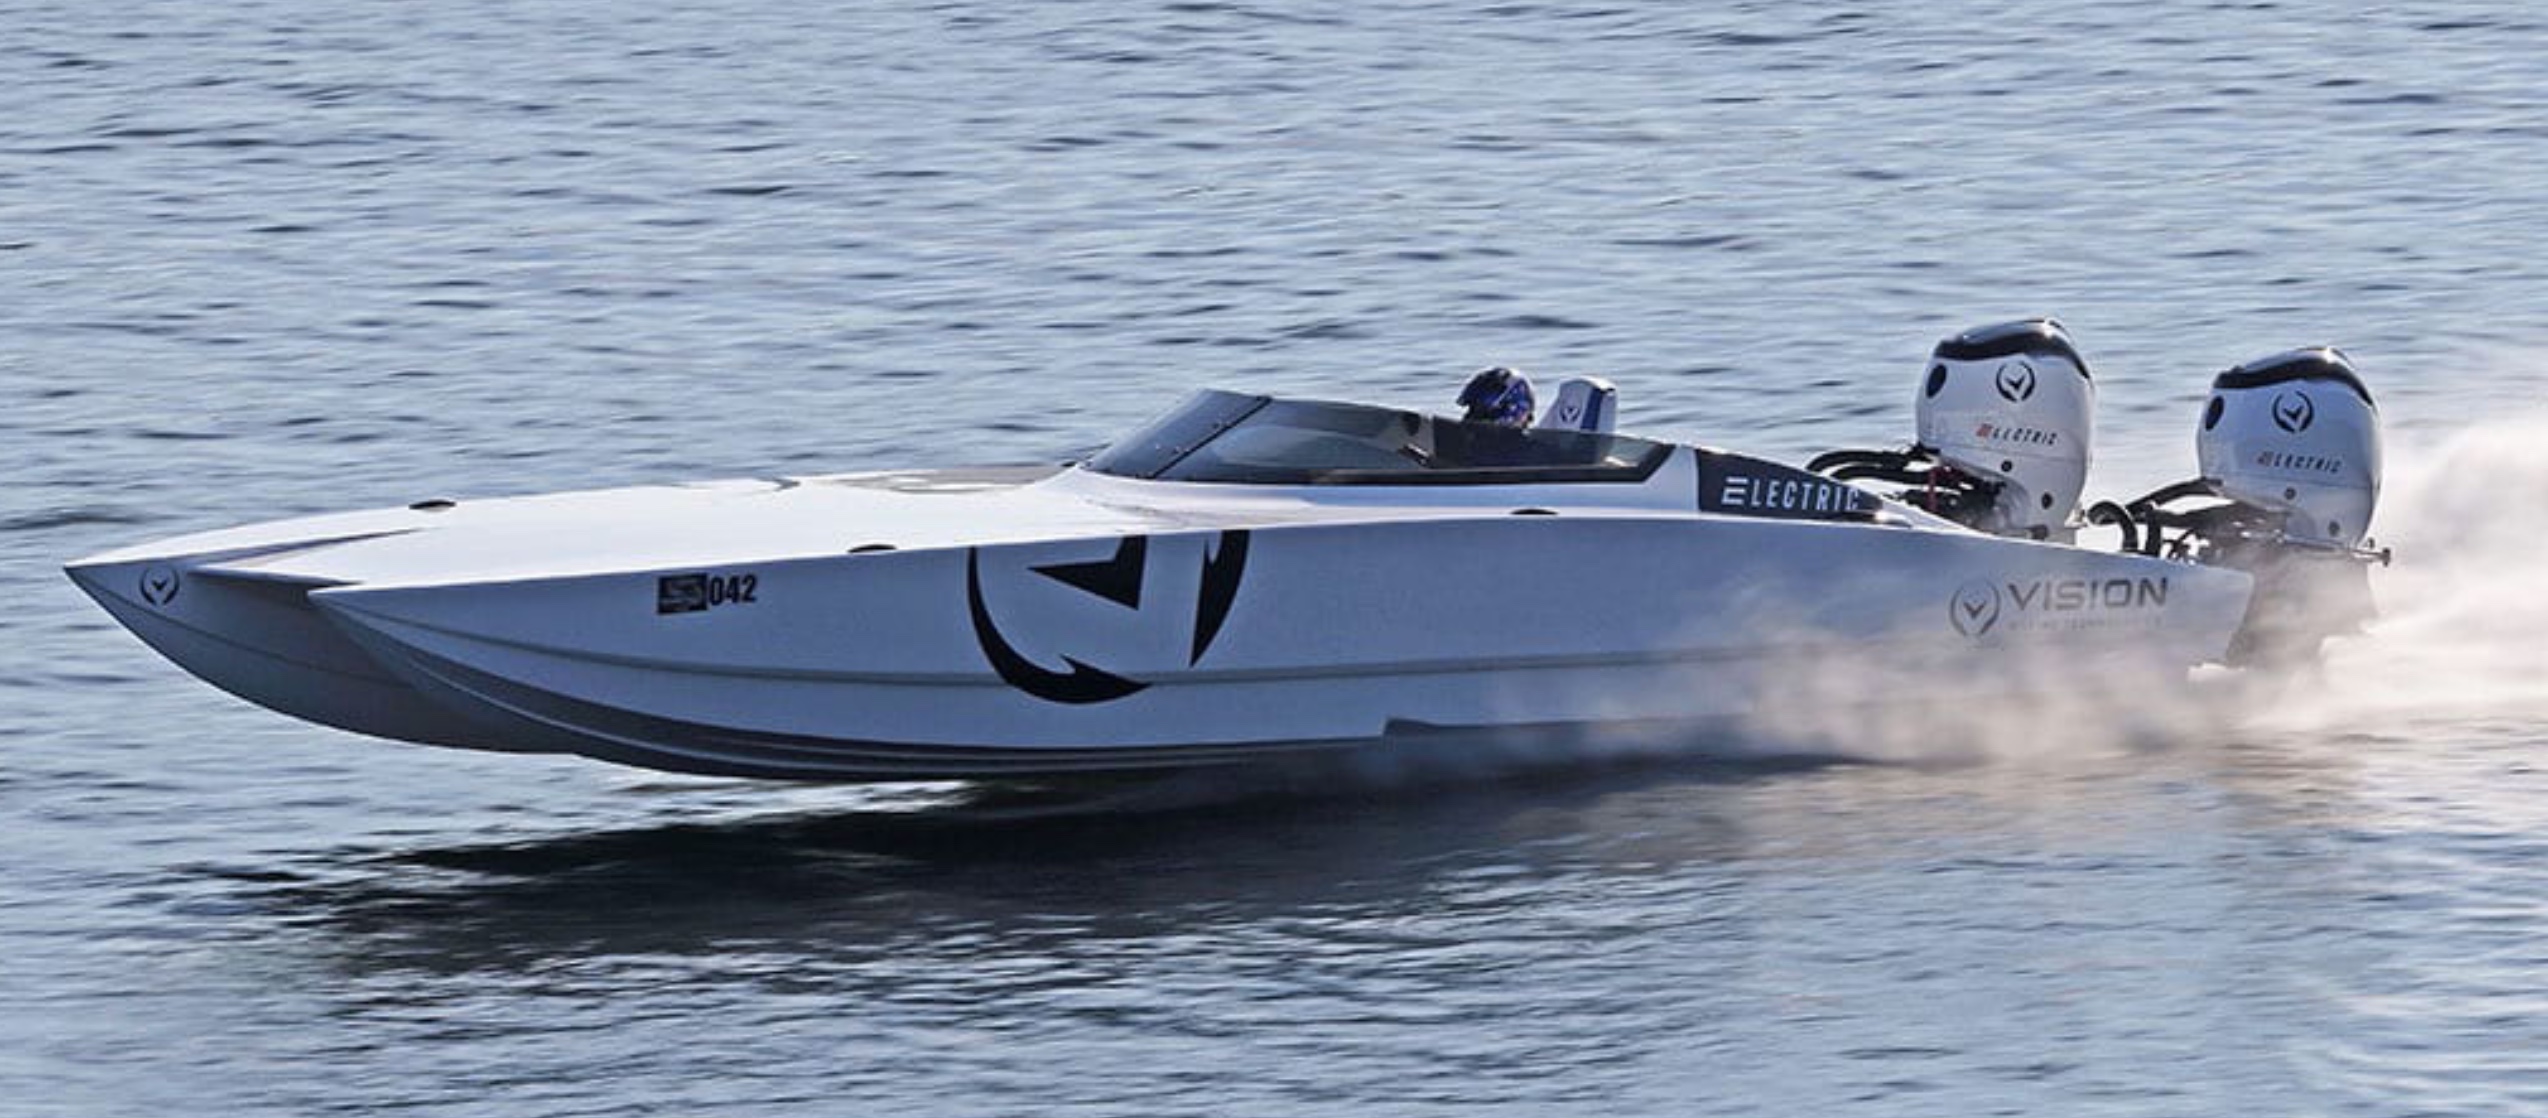 Electric boat breaks new speed record at 109 mph with Vision Marine's new outboard  motor